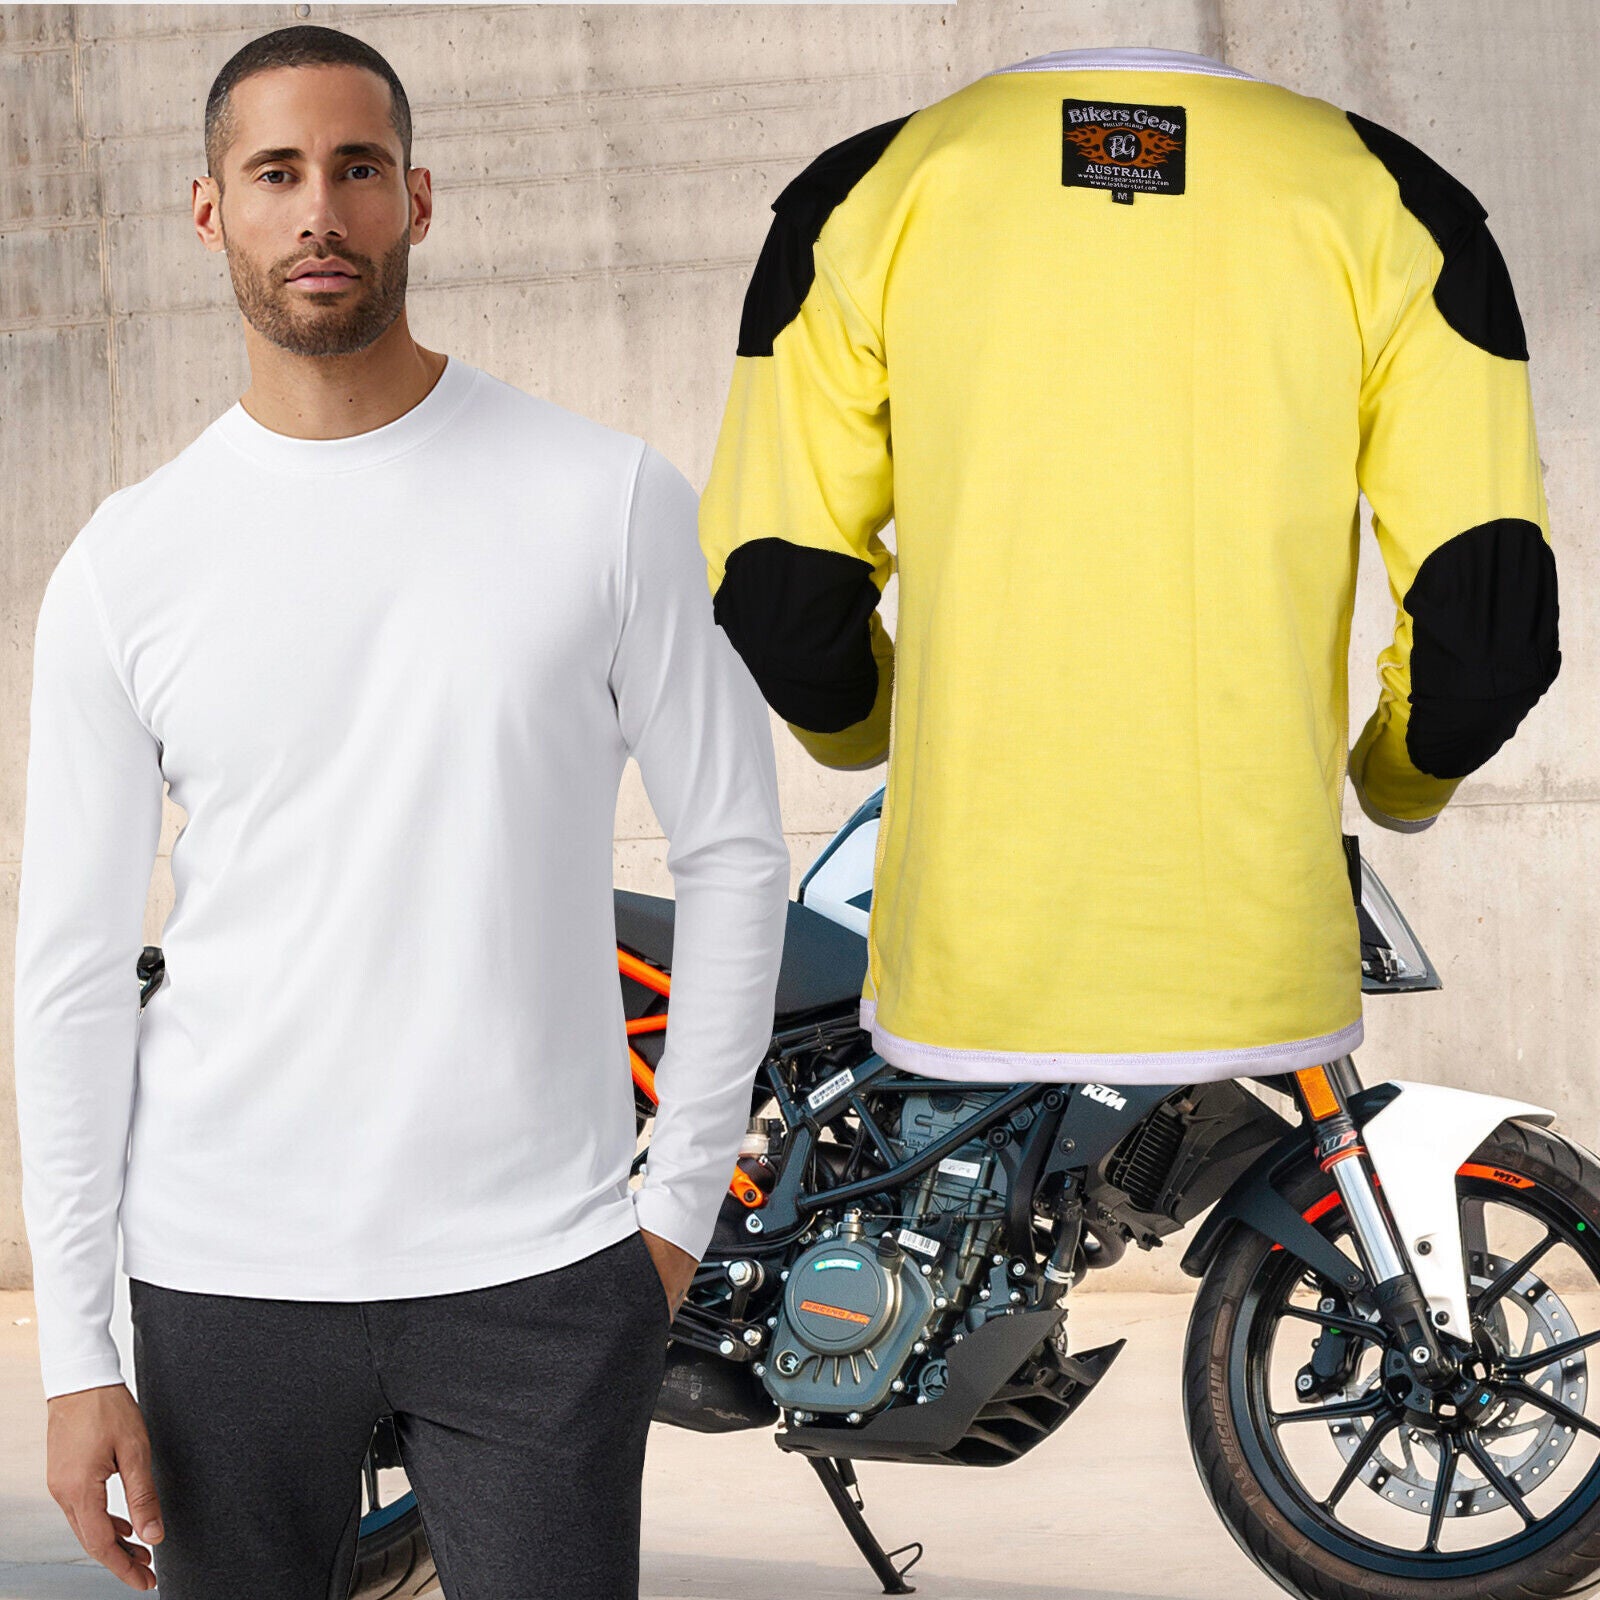 BGA Apex Motorcycle Kevlar Lined Protective T-Shirt White with CE Armour